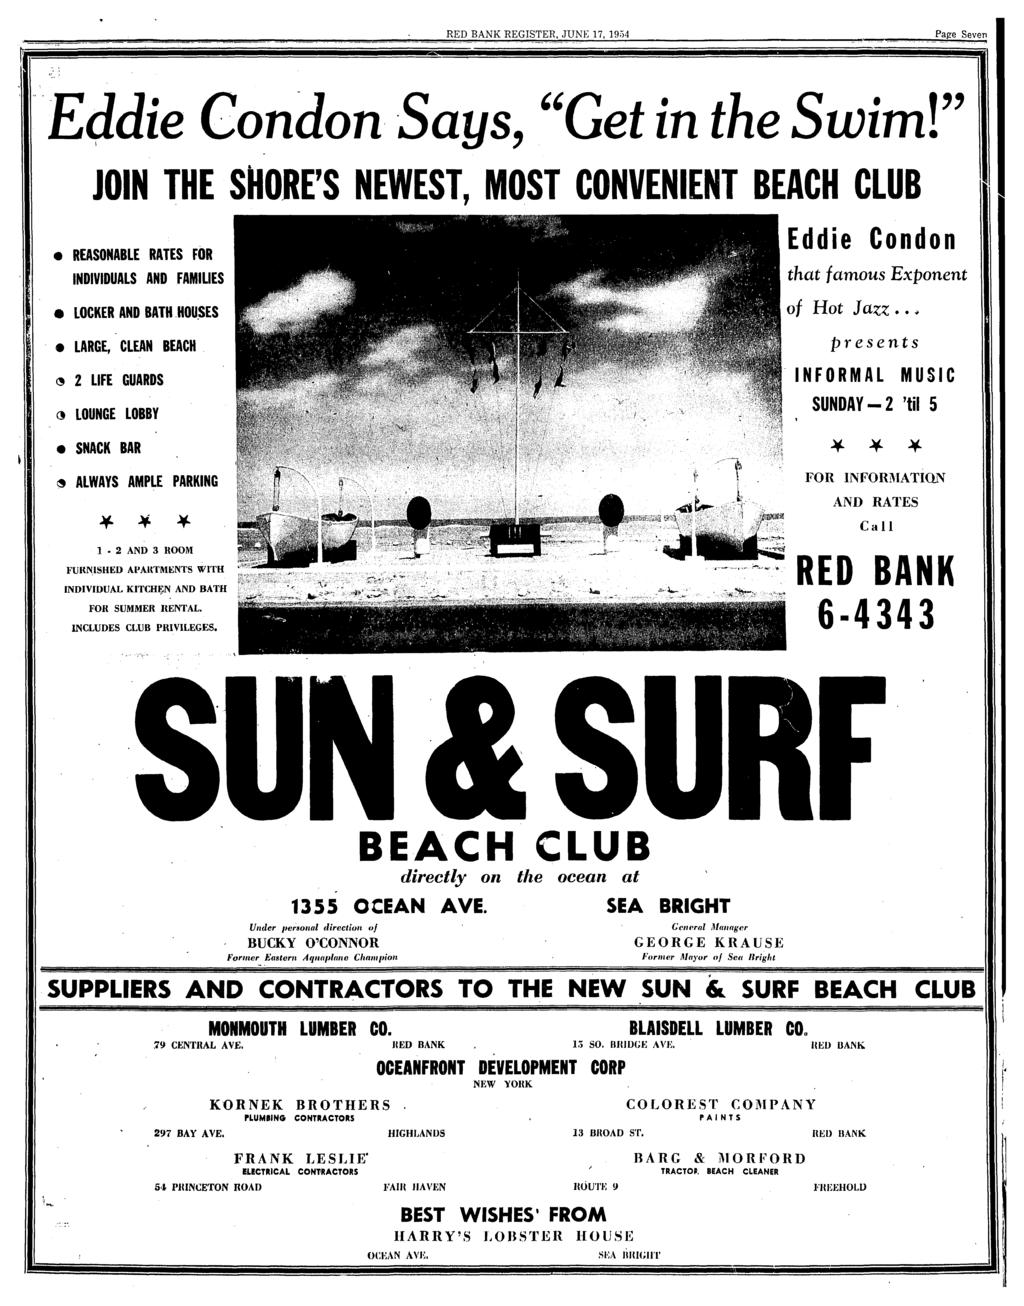 RED BANK REGISTER, JUNE 17, 1954 Page Seven Eddie Condon Says, "Get in the Su;im!